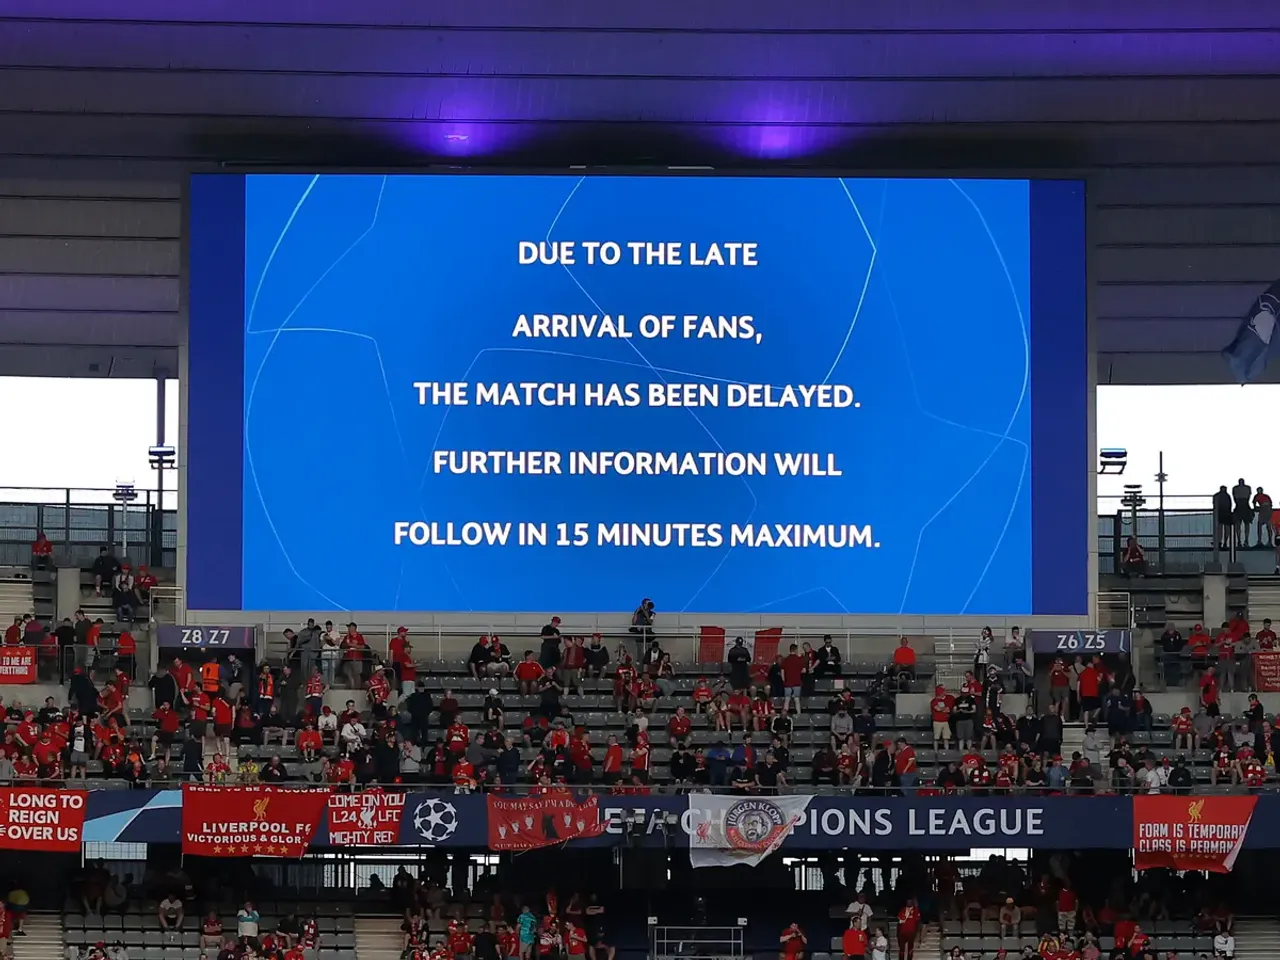 UEFA blamed for near-disaster at Champions League final